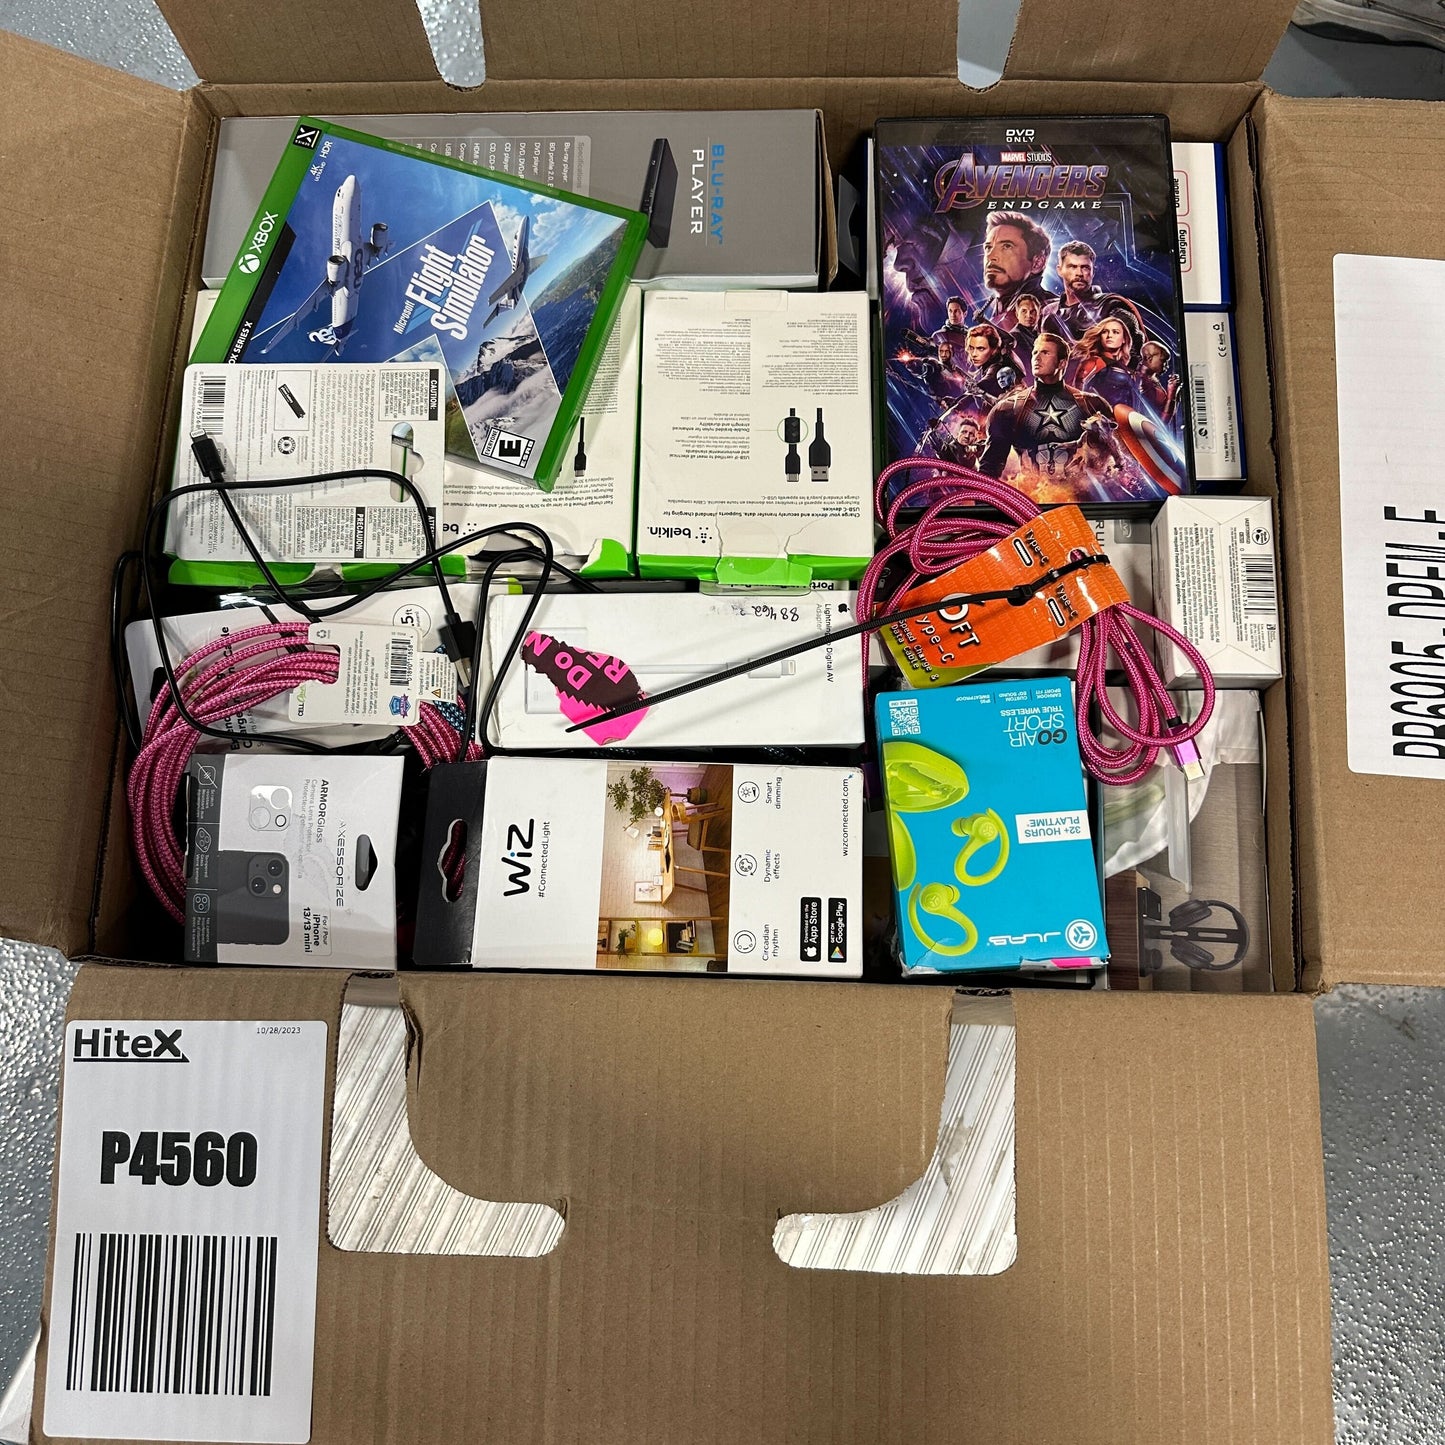 Box of Returns - Small Electronics - 45 items / MSRP $1,373 [FredM@ers]